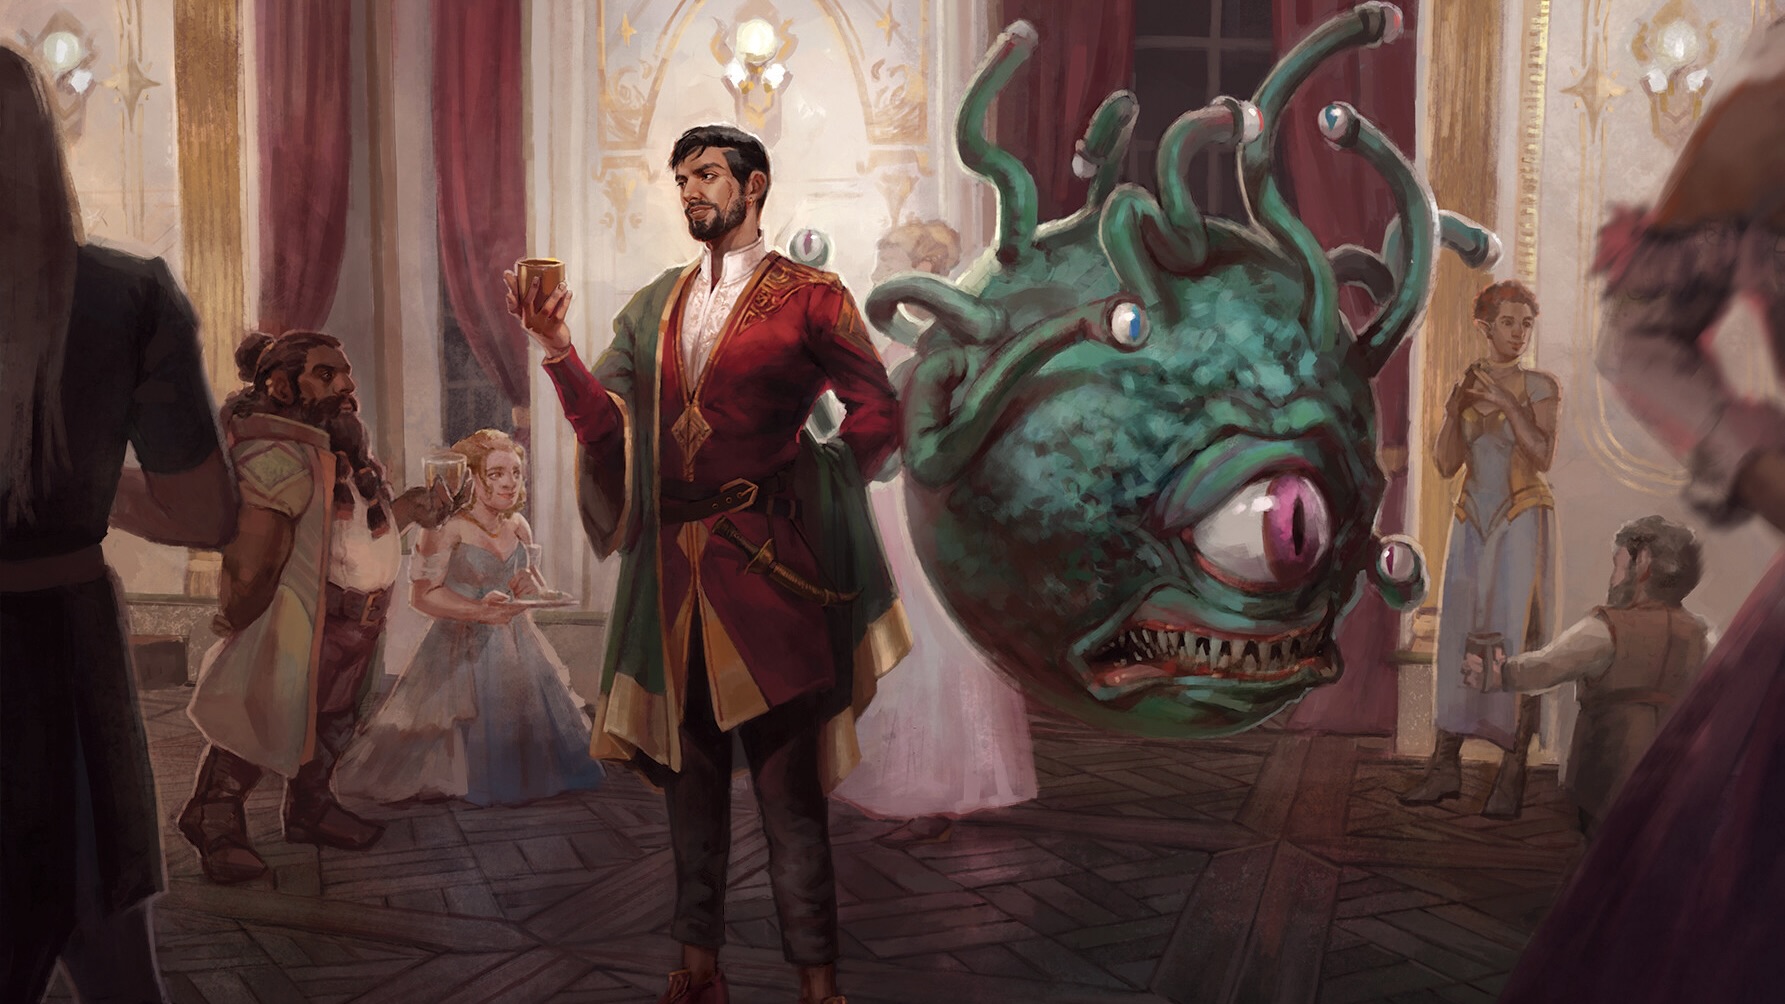 art showing a bard and a beholder in a ballroom scene